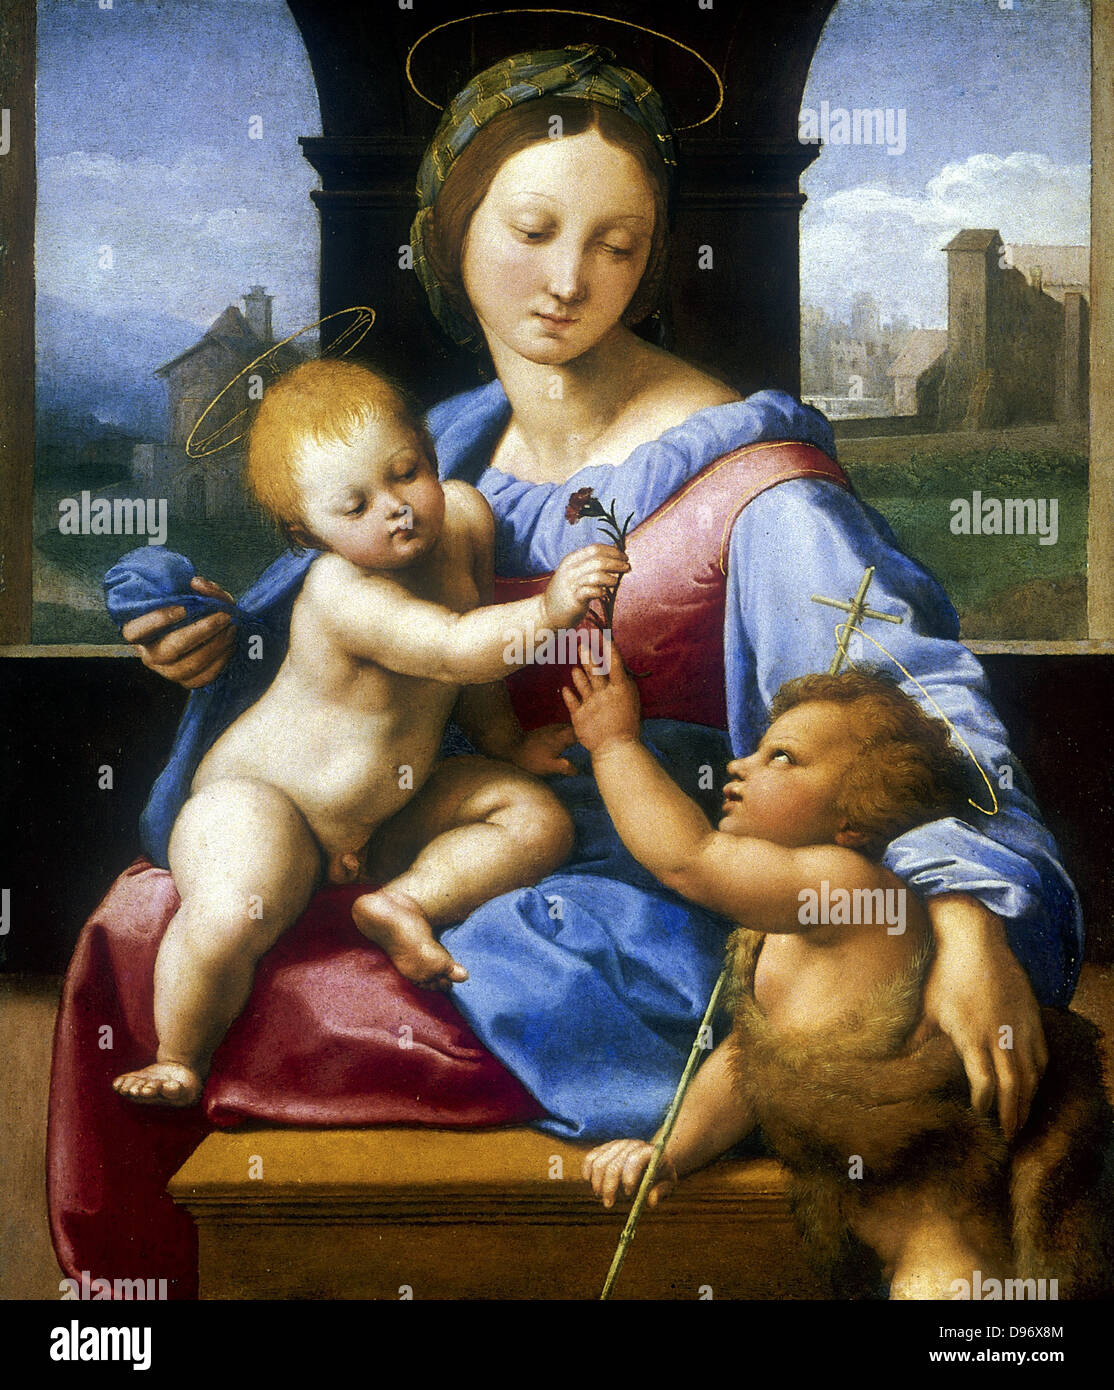 Madonna and Child with the Infant Baptist (The Garvagh Madonna) 1509-1510, depicting the moment when Christ takes the carnation from John the Baptist's Hand. Raphael (1483-1520) Raffaello Santi, Italian painter. Oil on Wood. Stock Photo